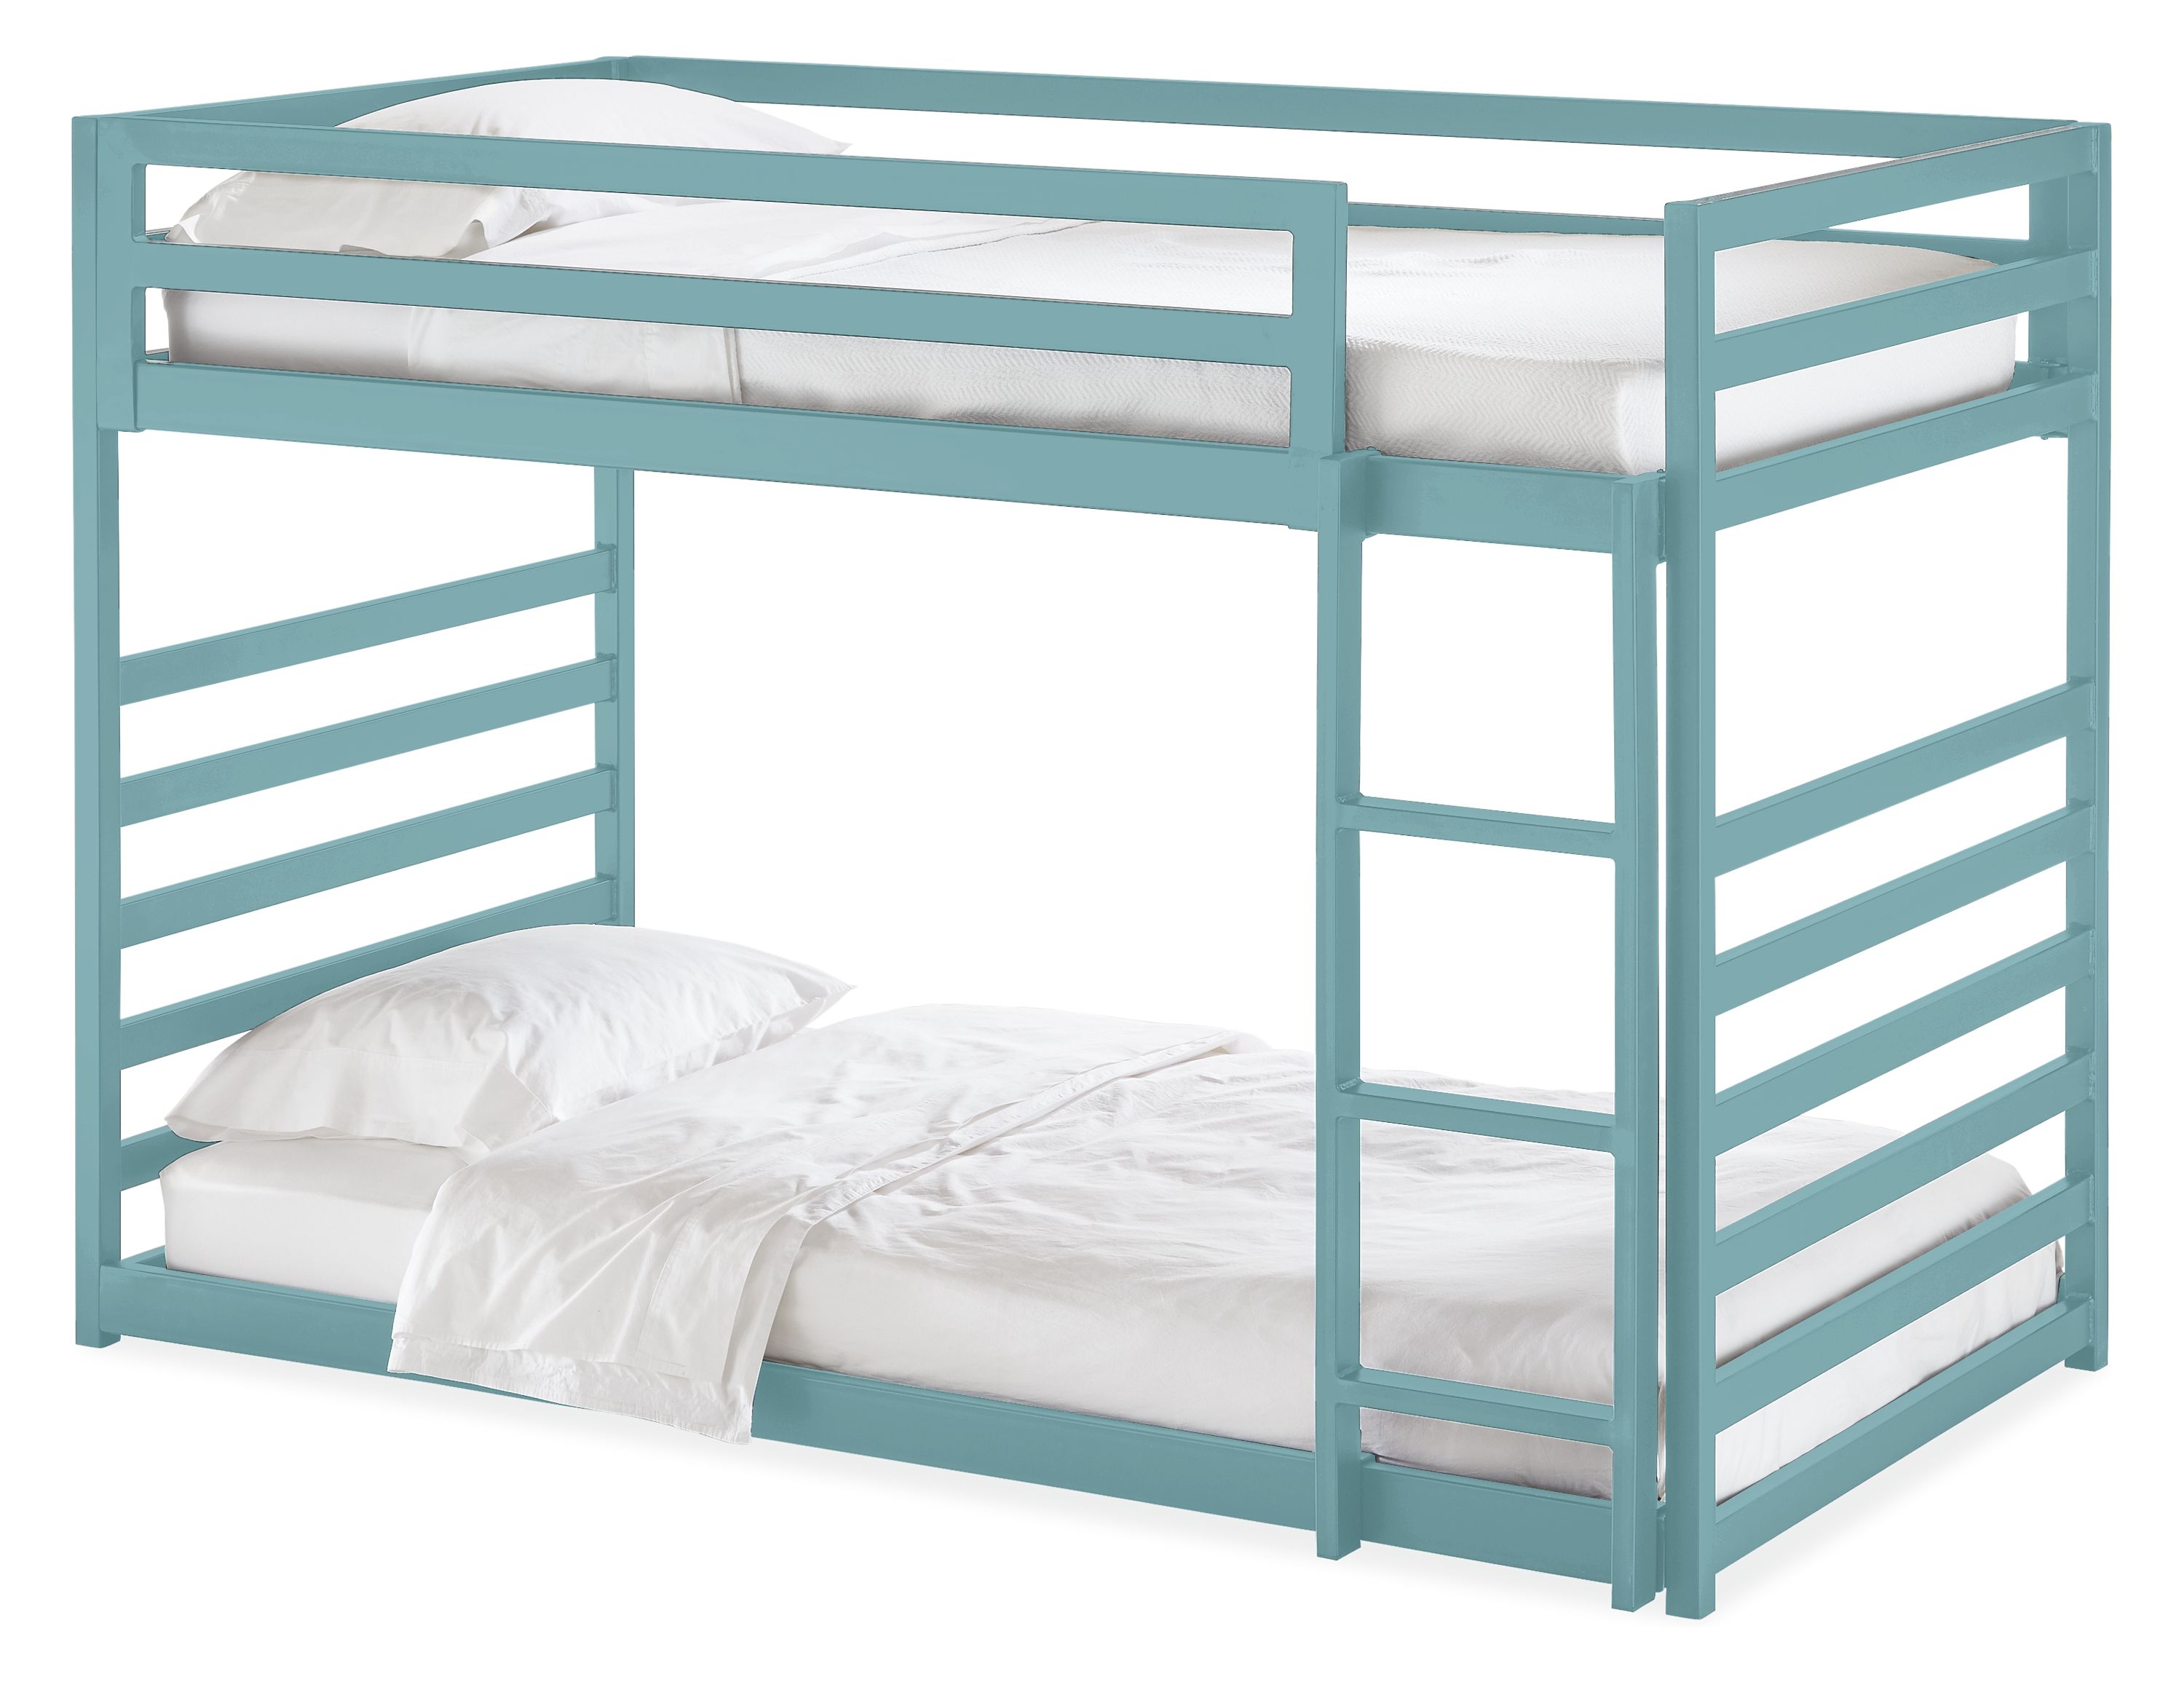 Fort Bunk Beds In Colors Twin Over, How Long Is A Twin Bunk Bed